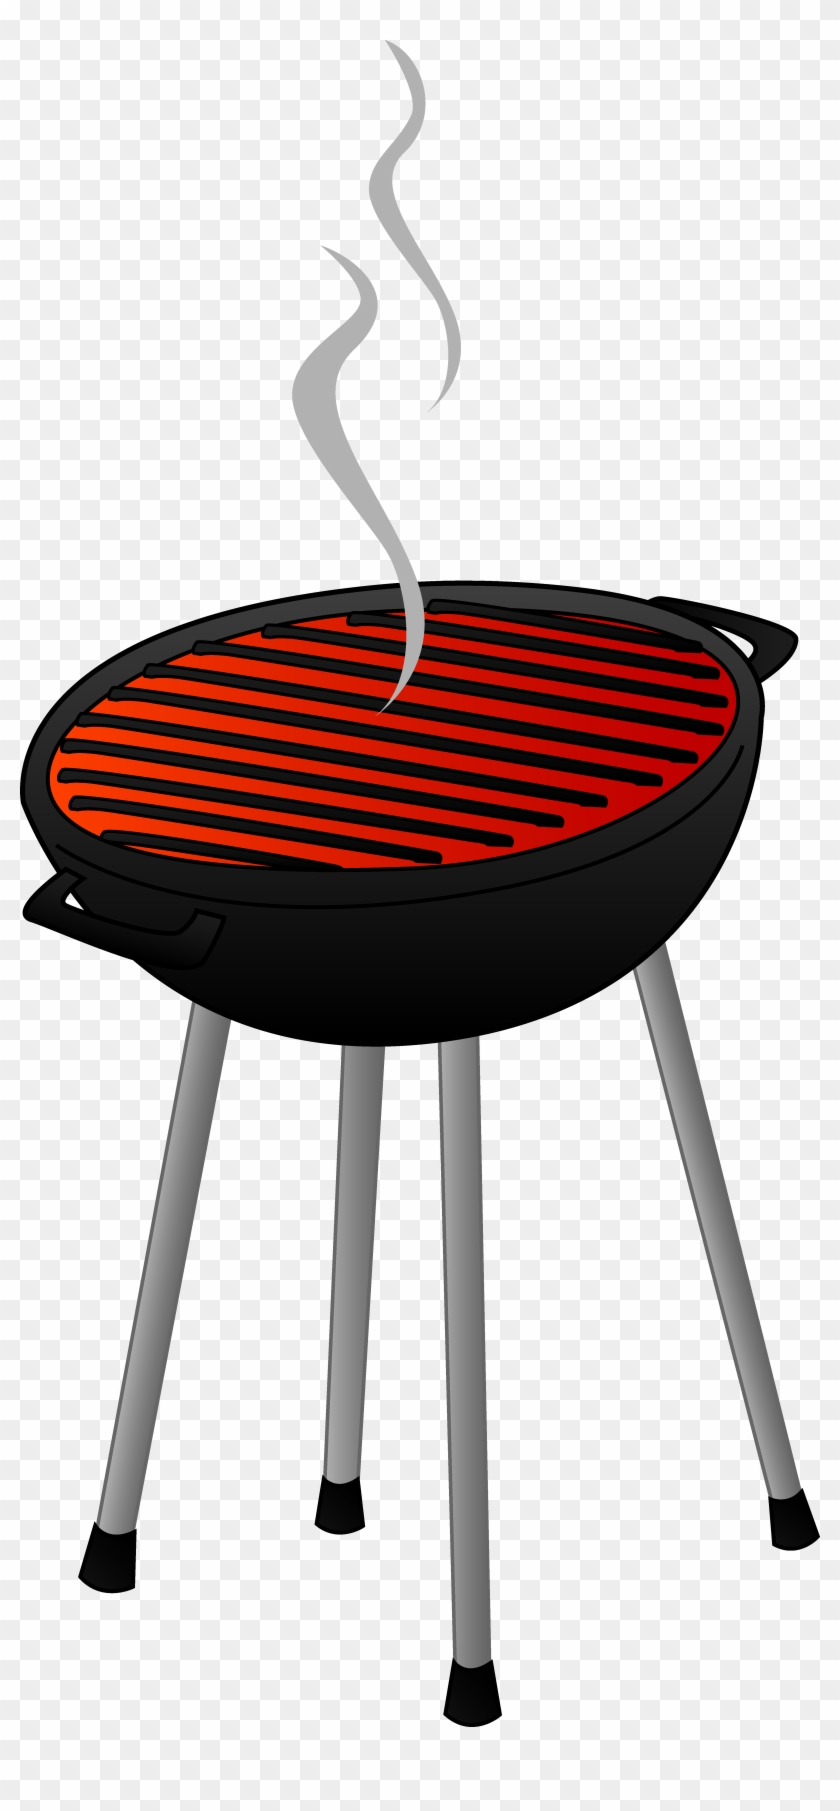 Charcoal Clipart - Grill Transparent #173935